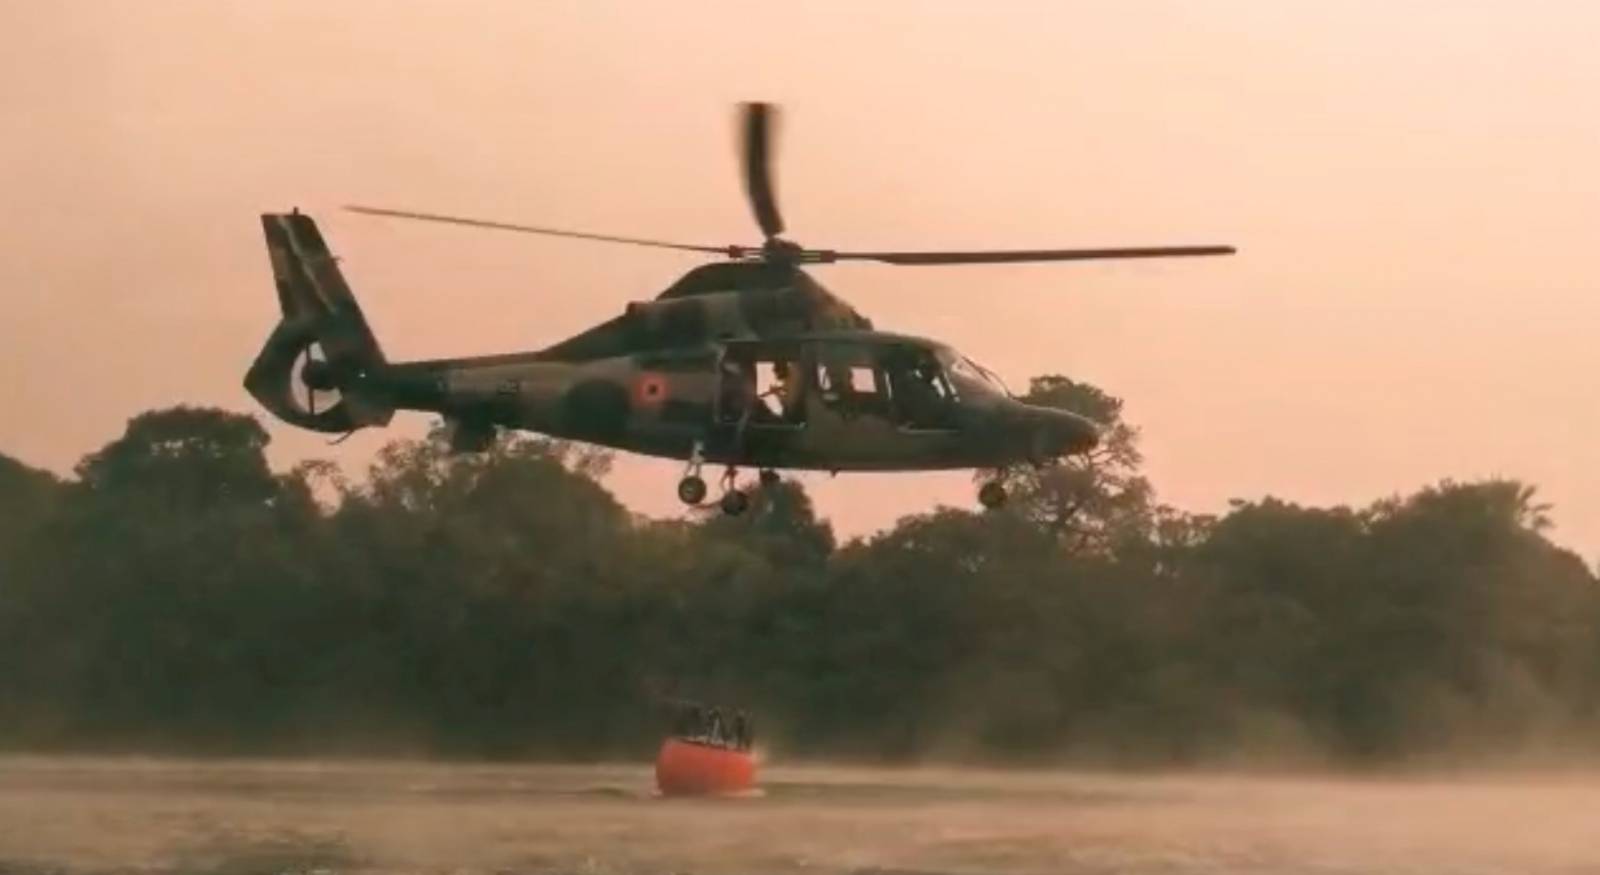 A Bolivian Air Force helicopter collects water to fight forest fire, near Robore